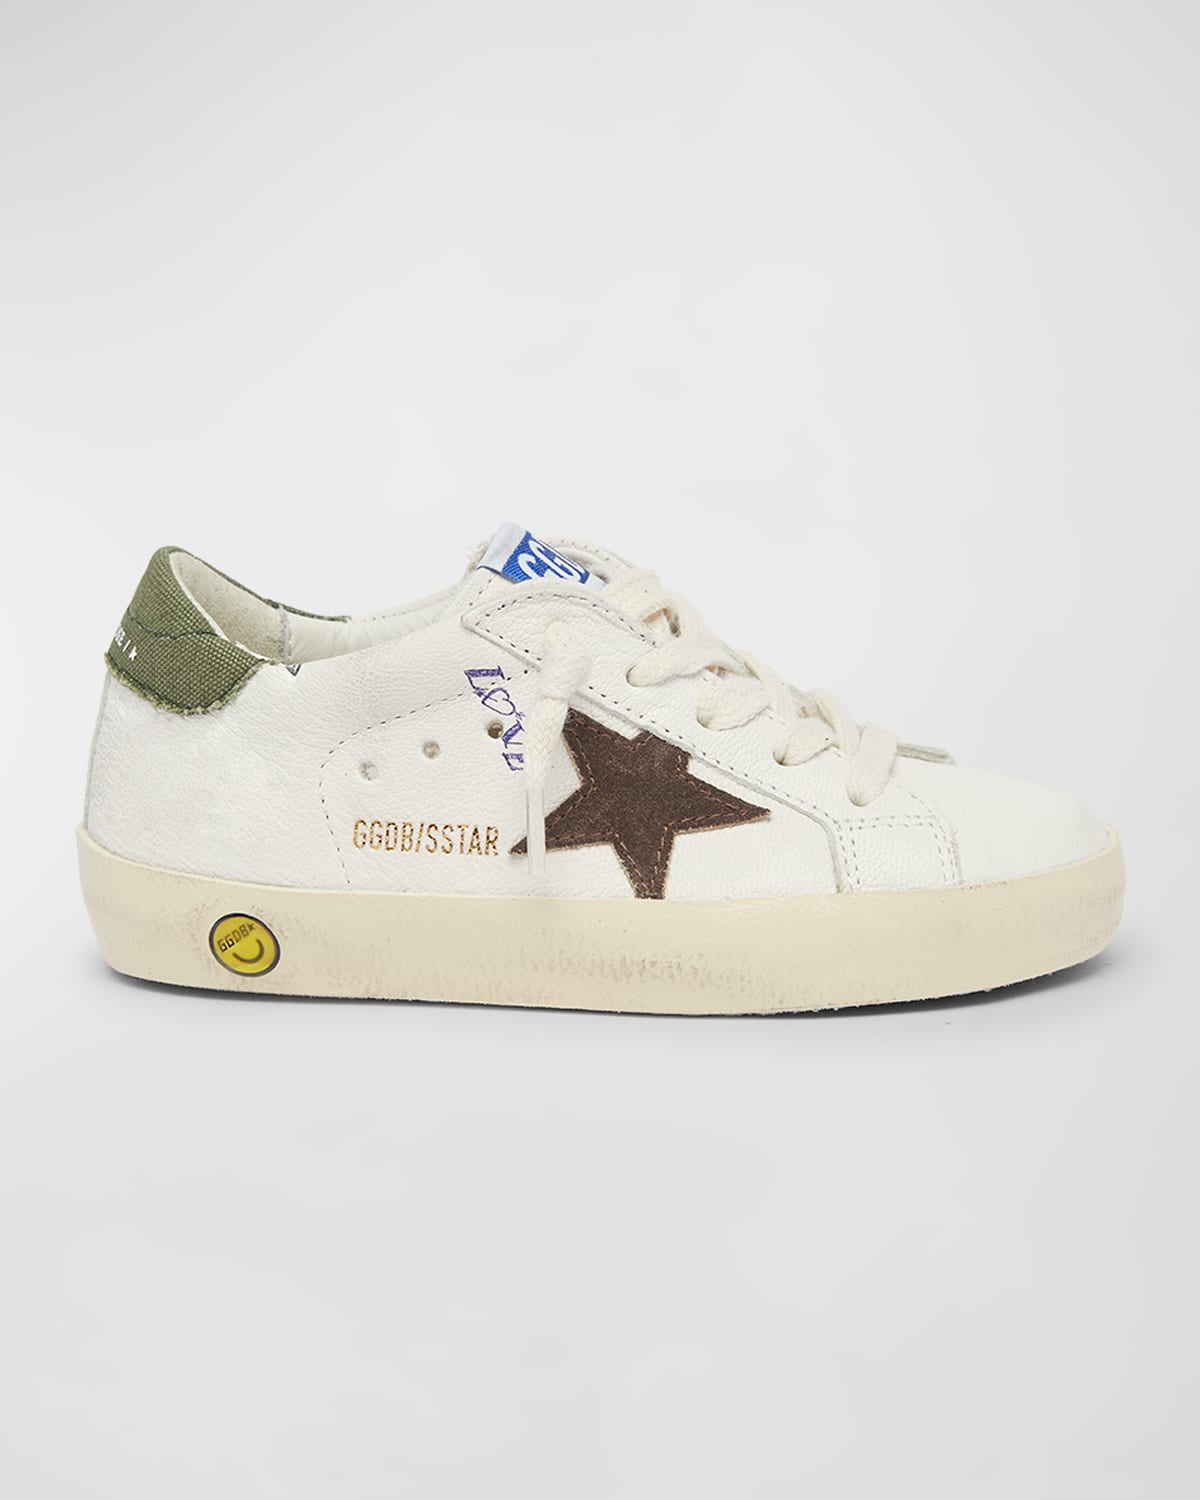 GOLDEN GOOSE KID'S SUPER STAR NAPPA LEATHER SNEAKERS, TODDLER/KIDS